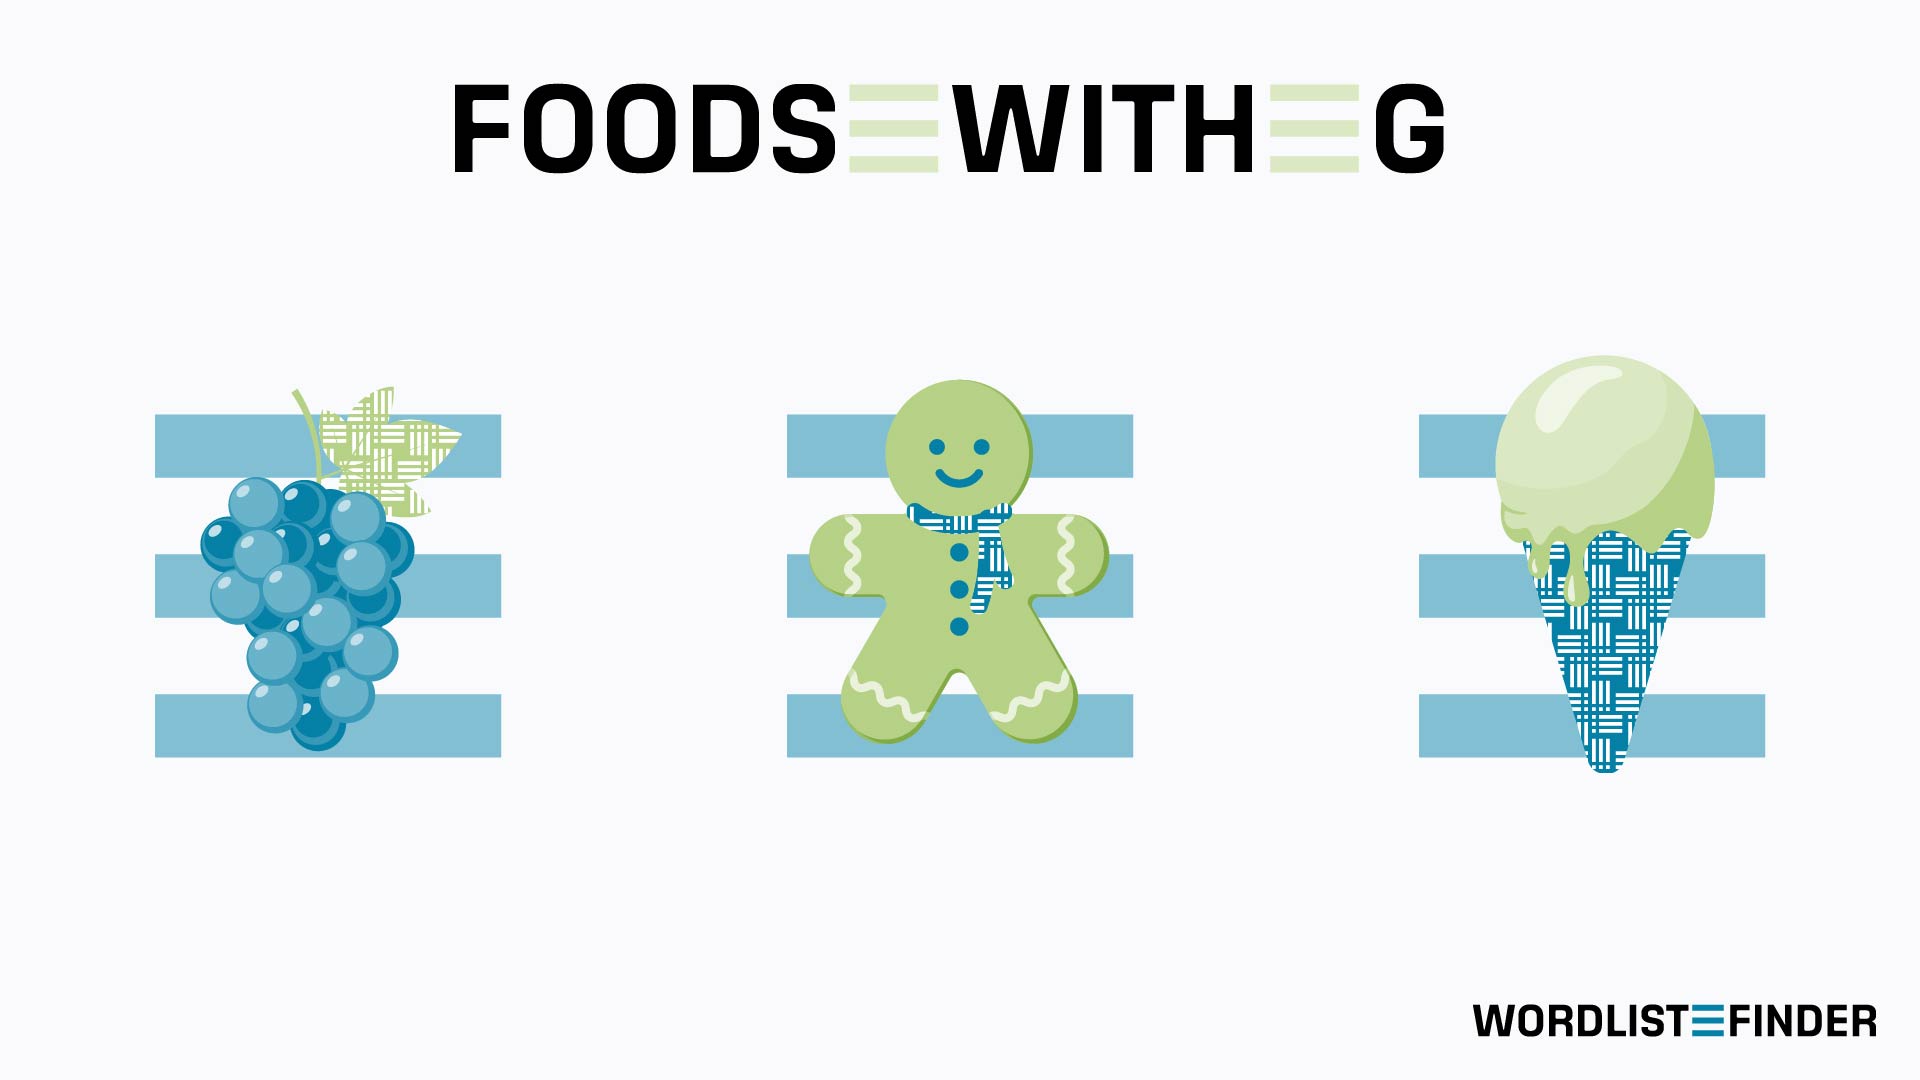 Foods with G